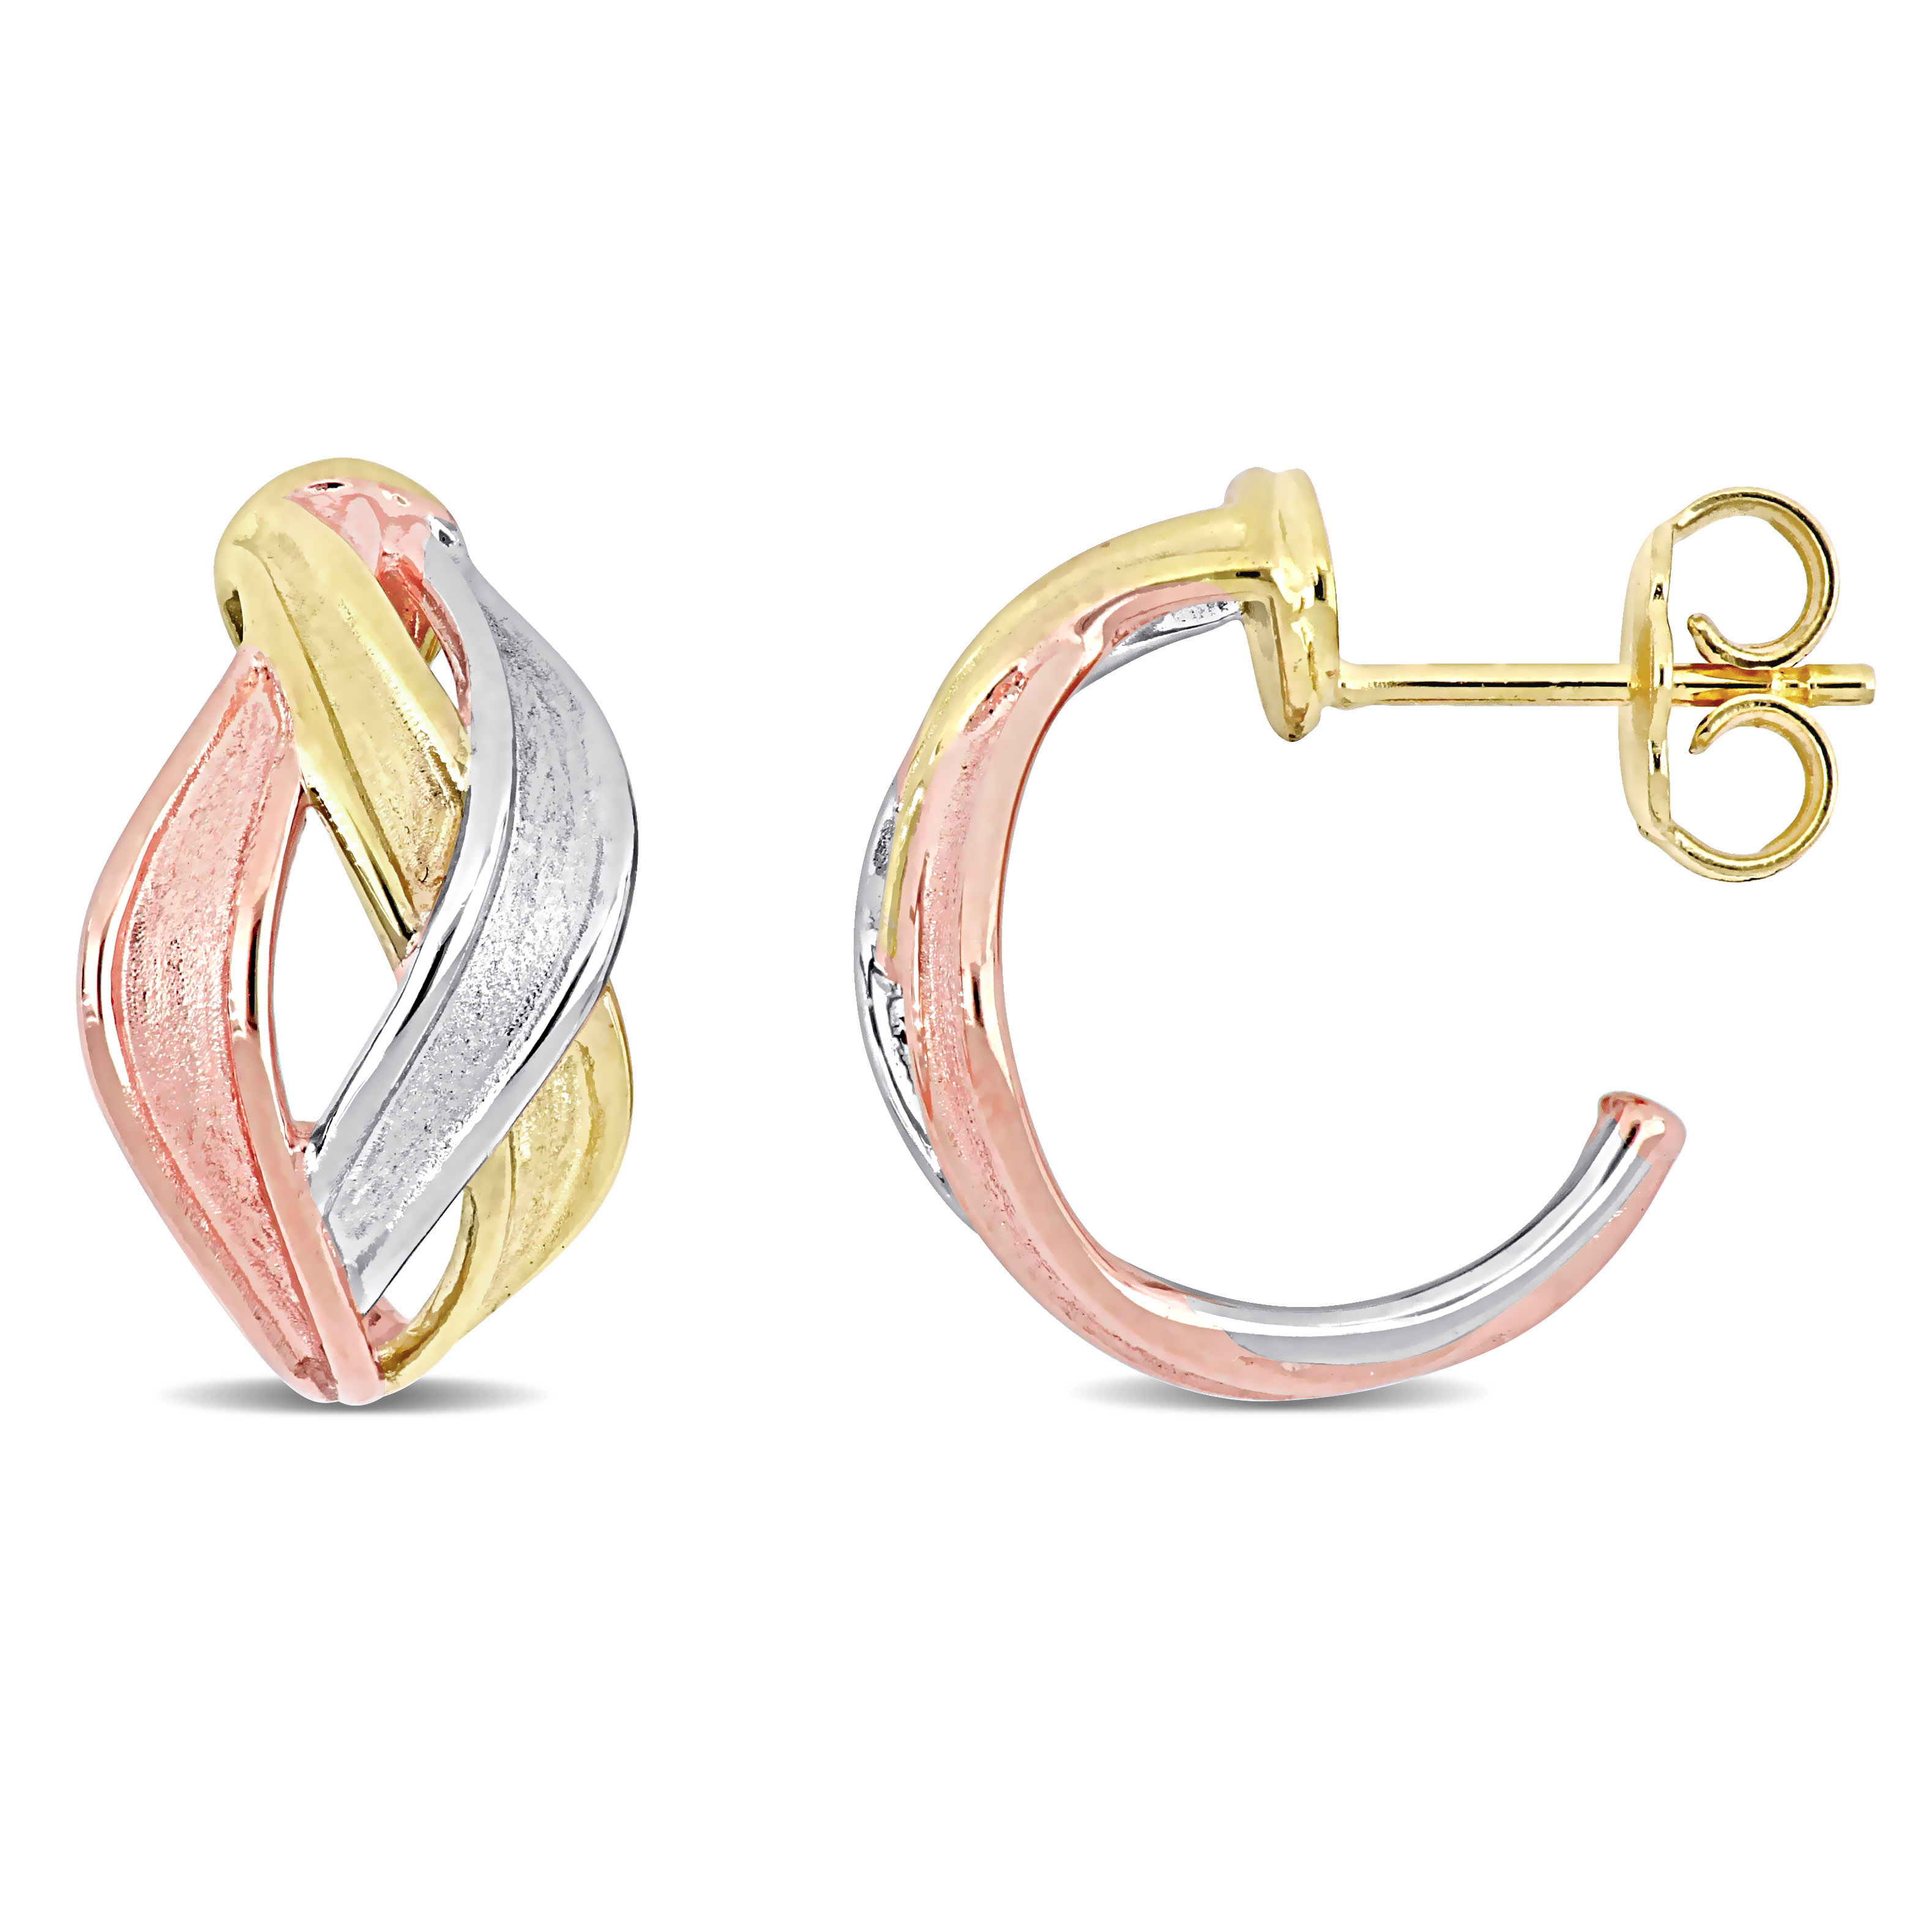 Swirl Earrings in 3-Tone 18k Yellow, Rose and White Gold - CBG000345